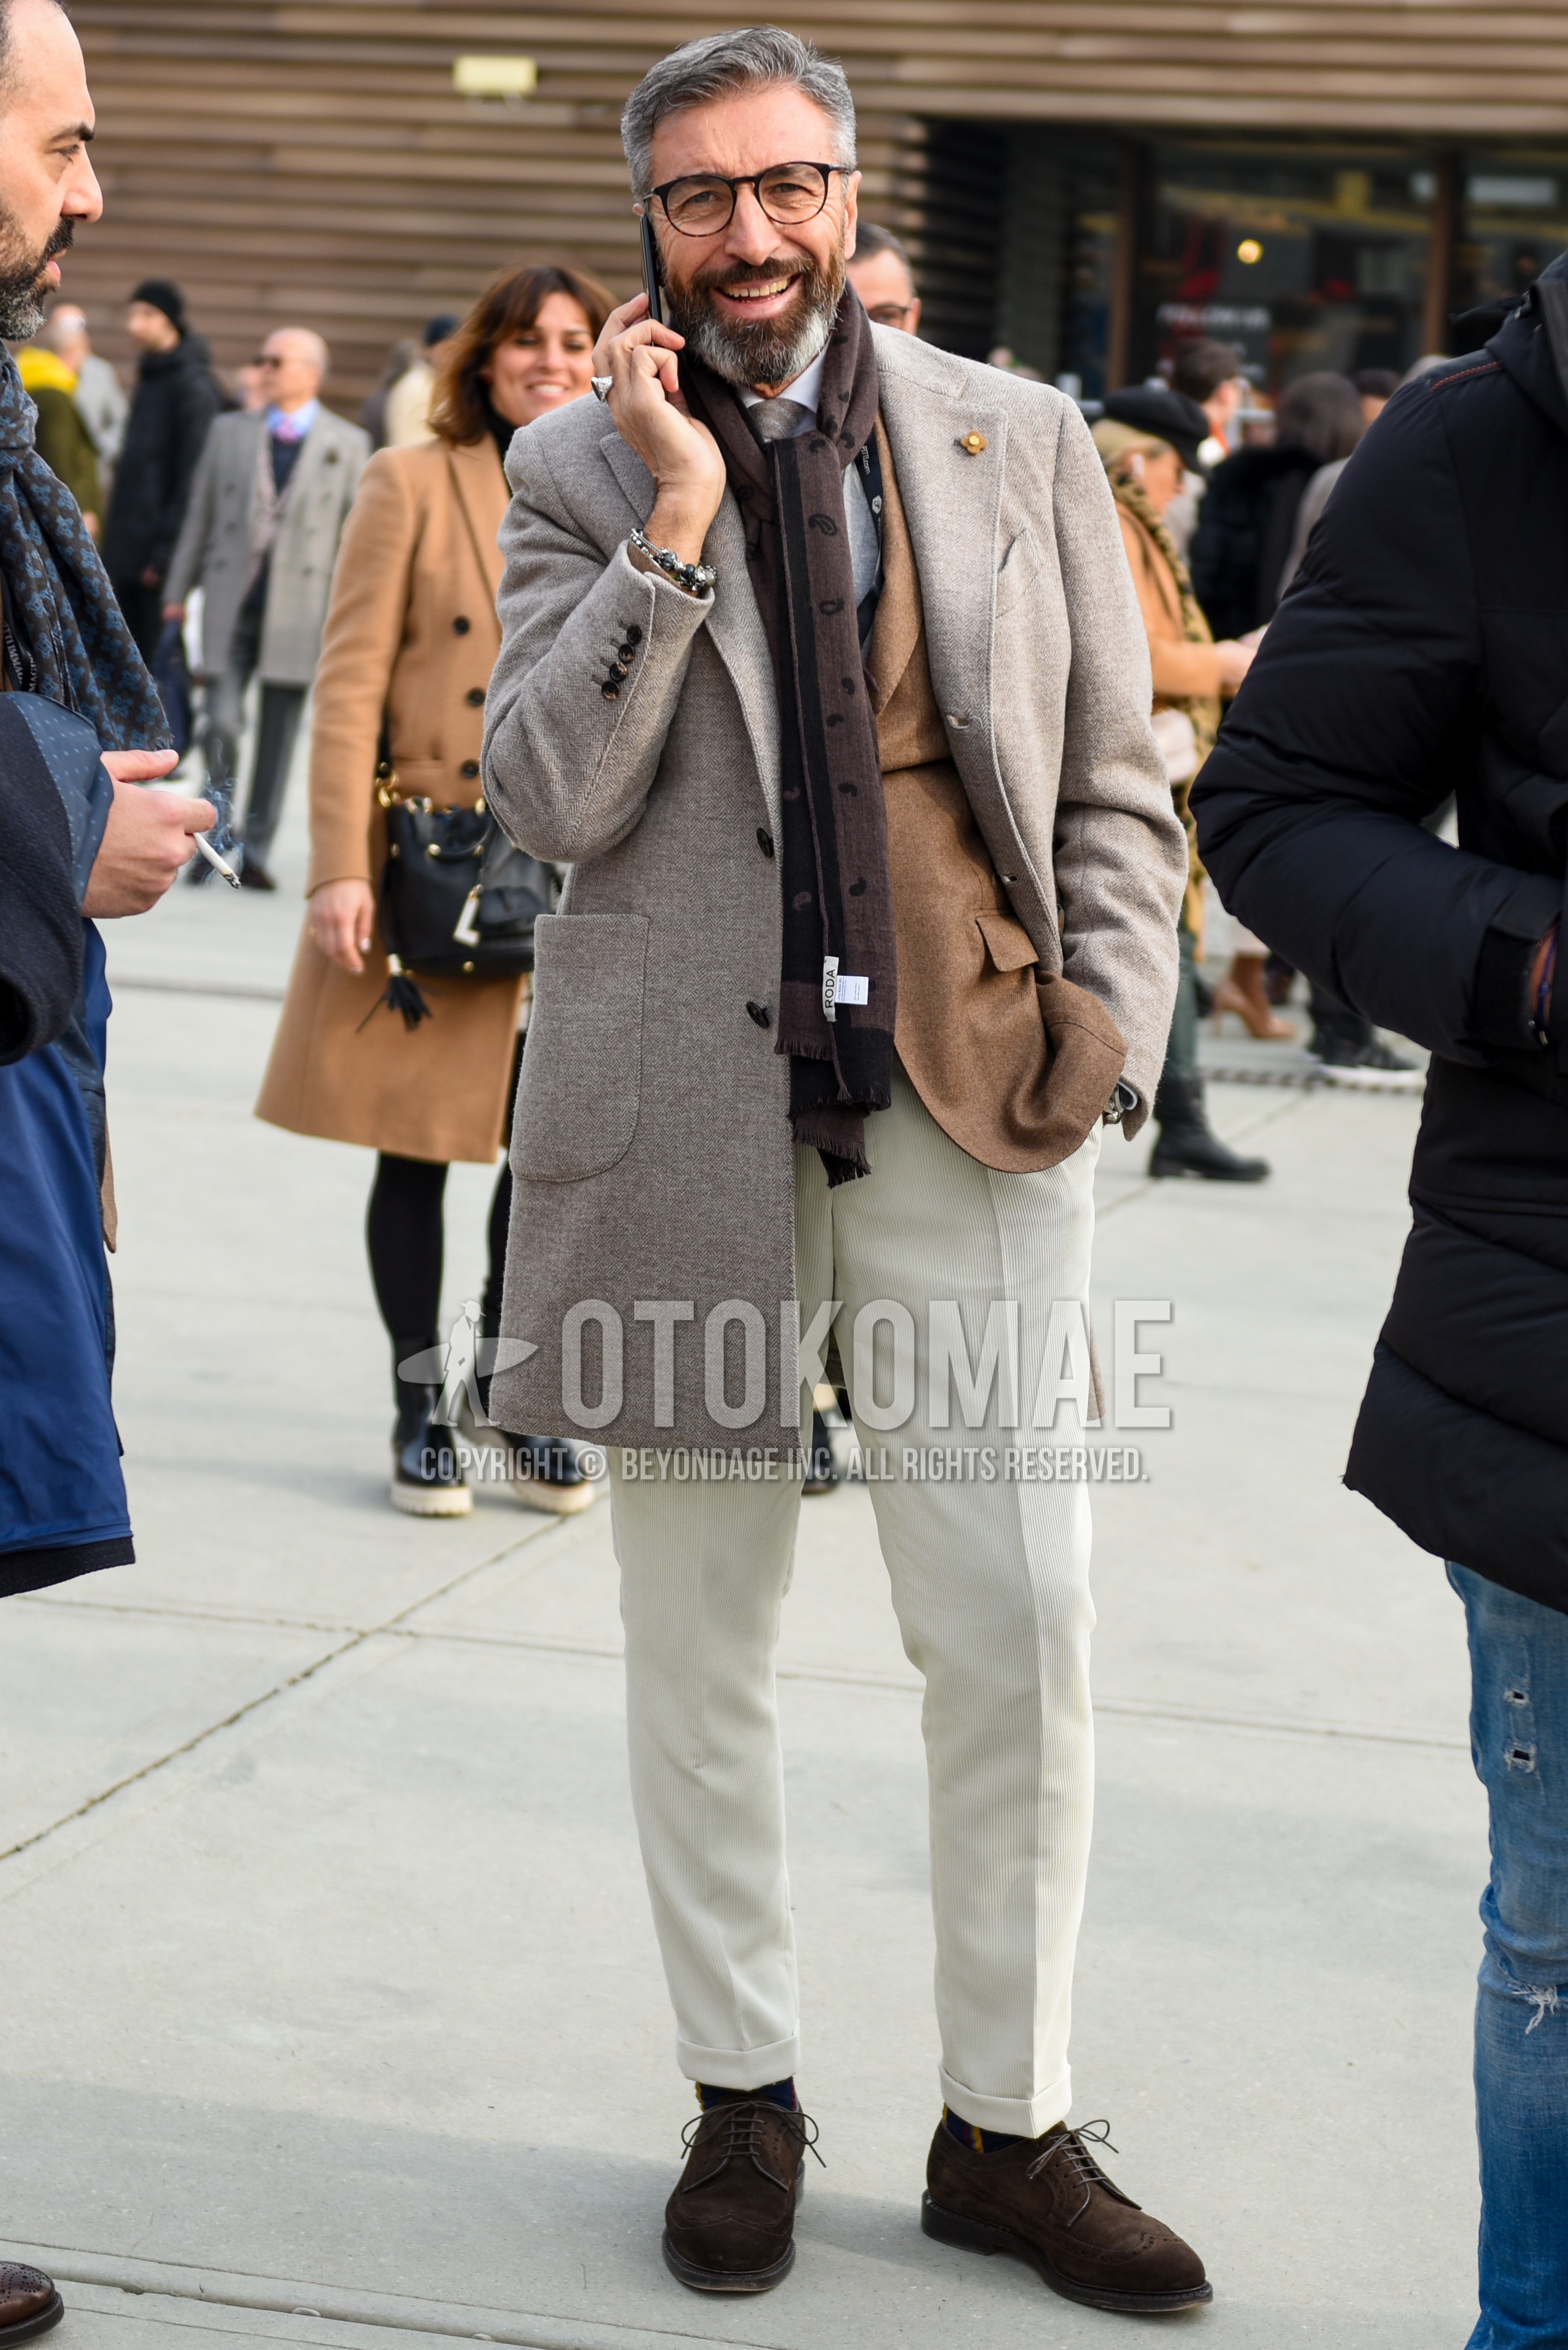 Men's autumn winter outfit with brown tortoiseshell glasses, brown paisley scarf, beige plain chester coat, brown plain tailored jacket, white plain shirt, white plain slacks, brown wing-tip shoes leather shoes, gray plain necktie.